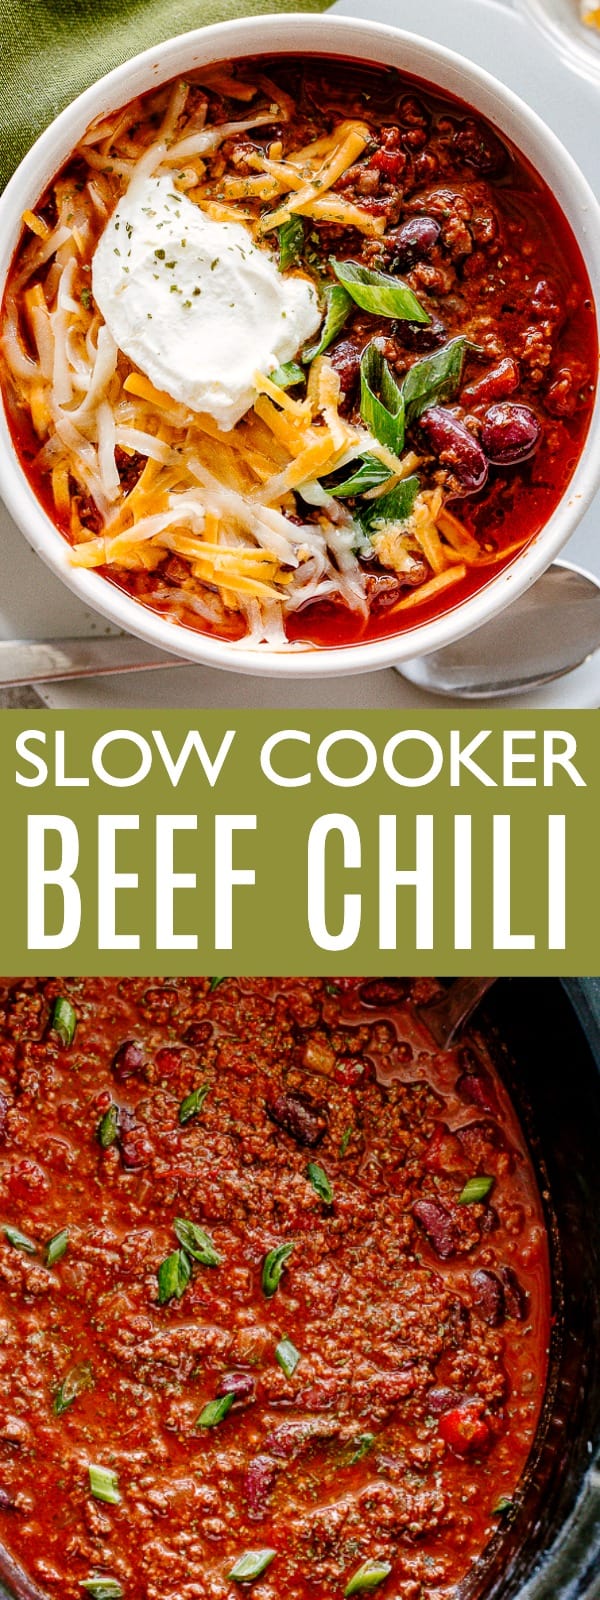 Slow Cooker Beef Chili | Diethood